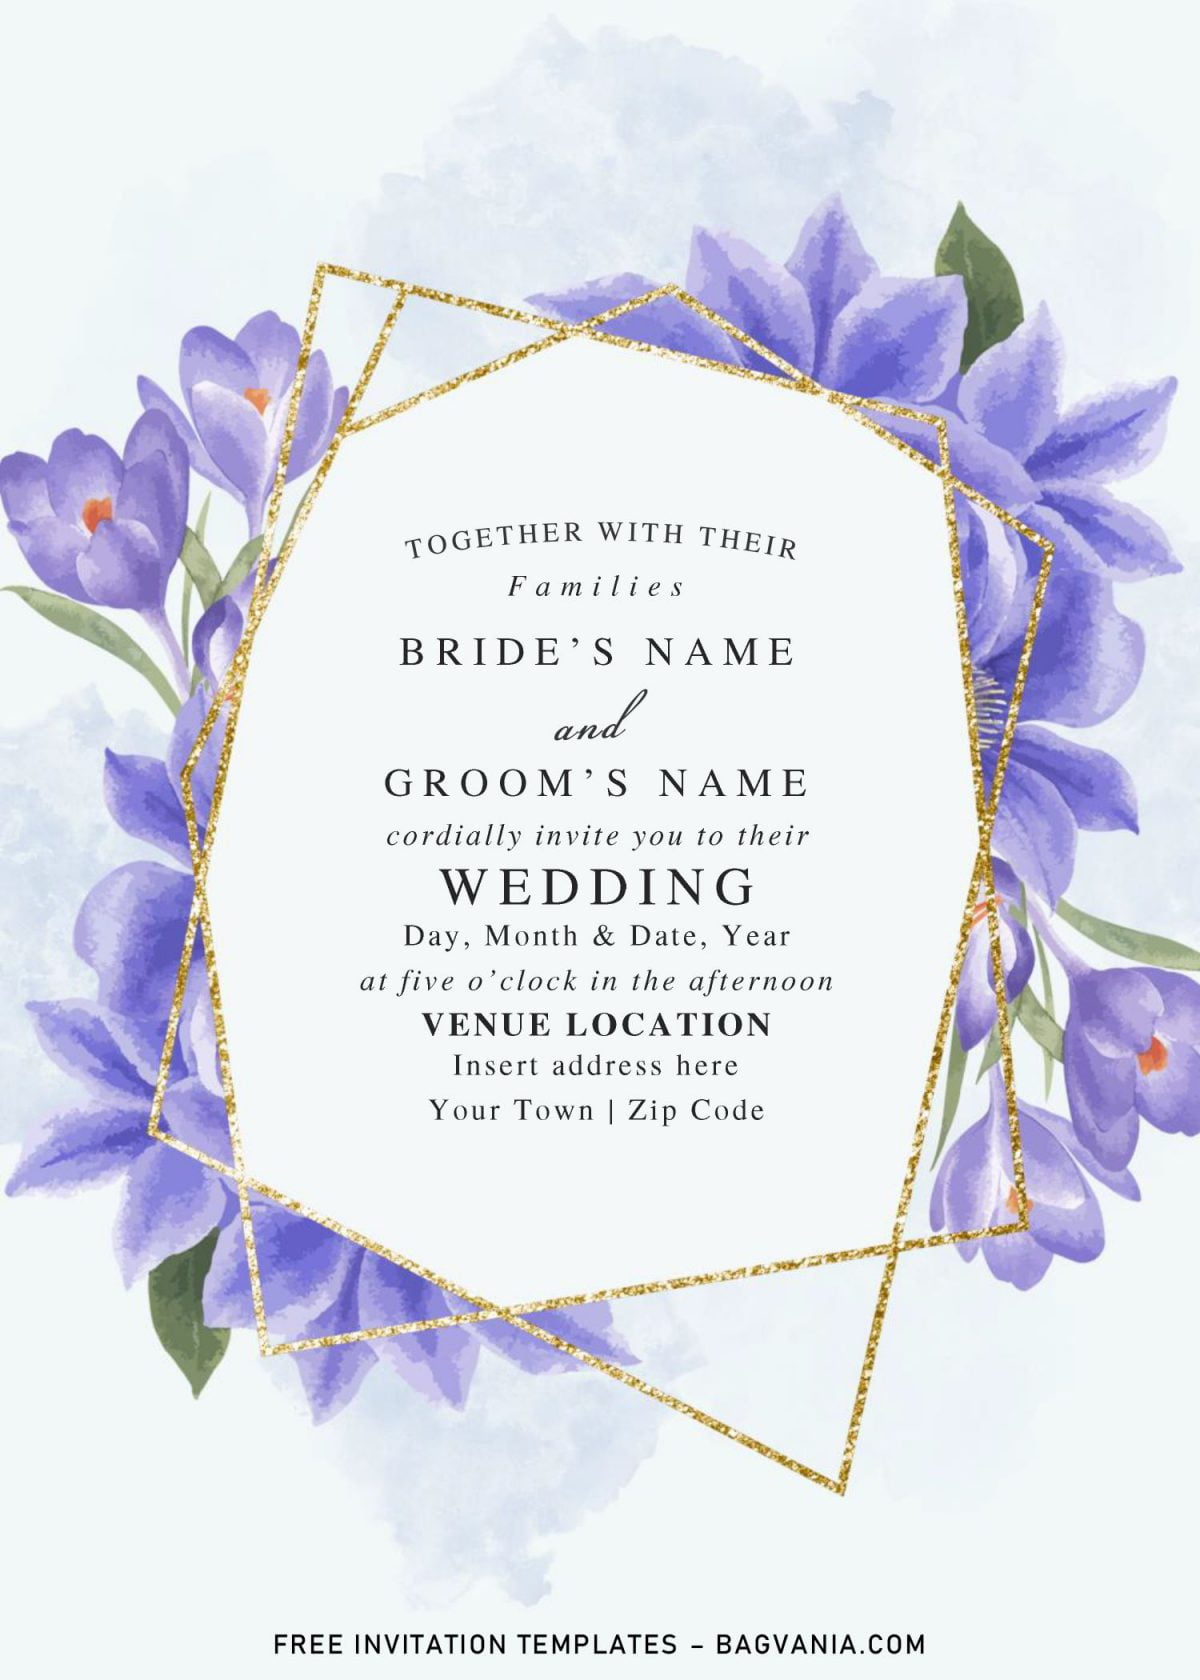 Free Blue Floral And Gold Geometric Wedding Invitation Templates For Word and has portrait orientation card design